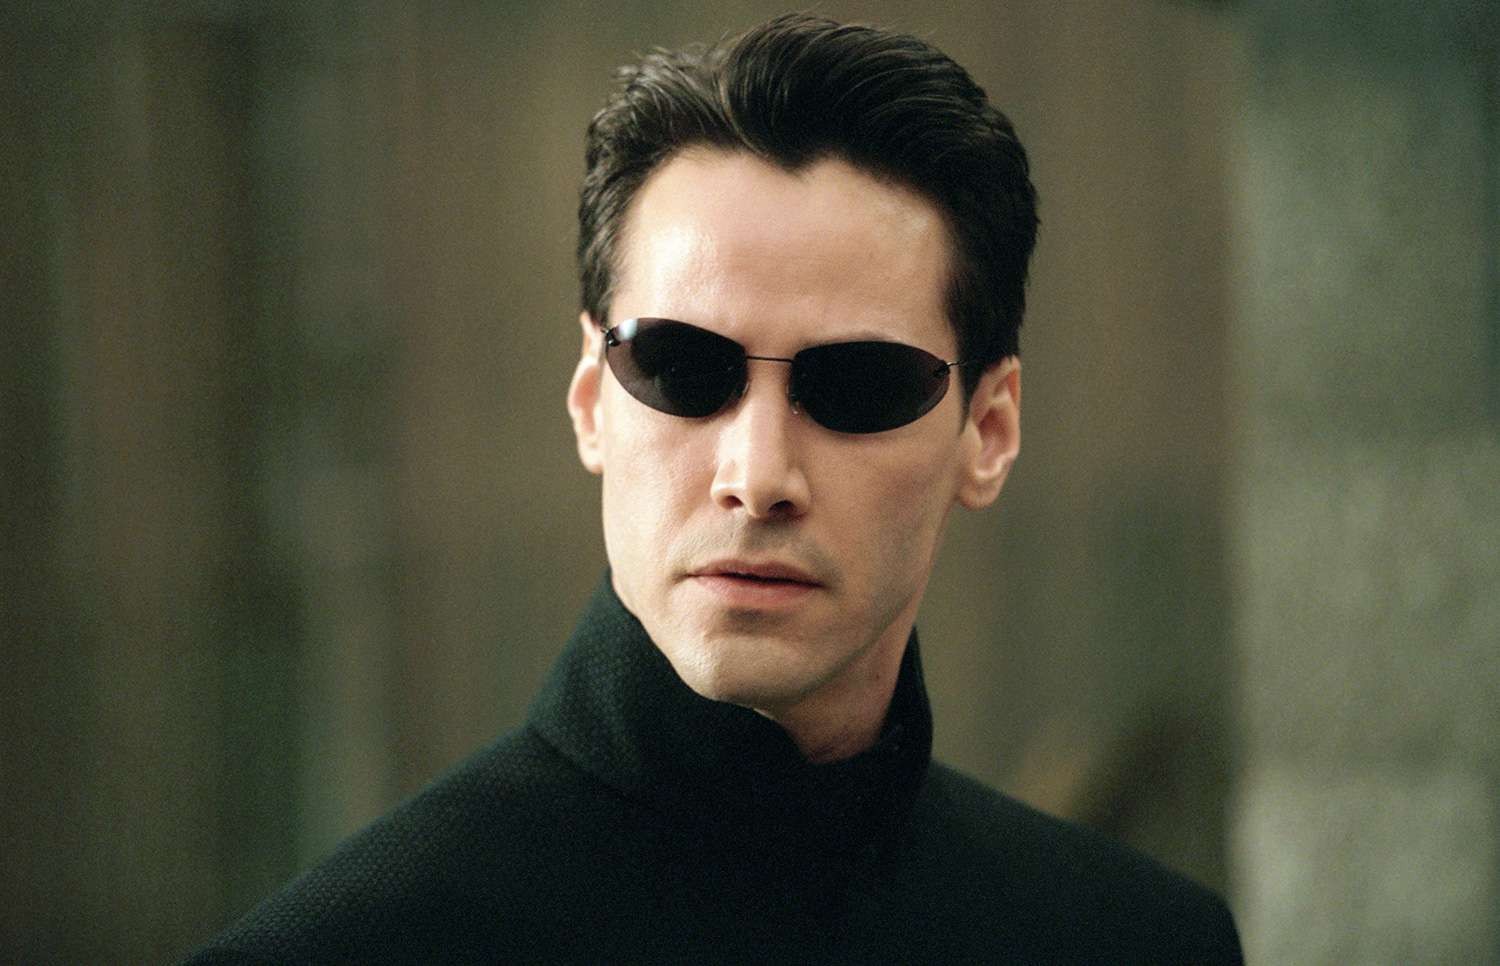 Keanu Reeves with his signature sunglasses staring on in The Matrix